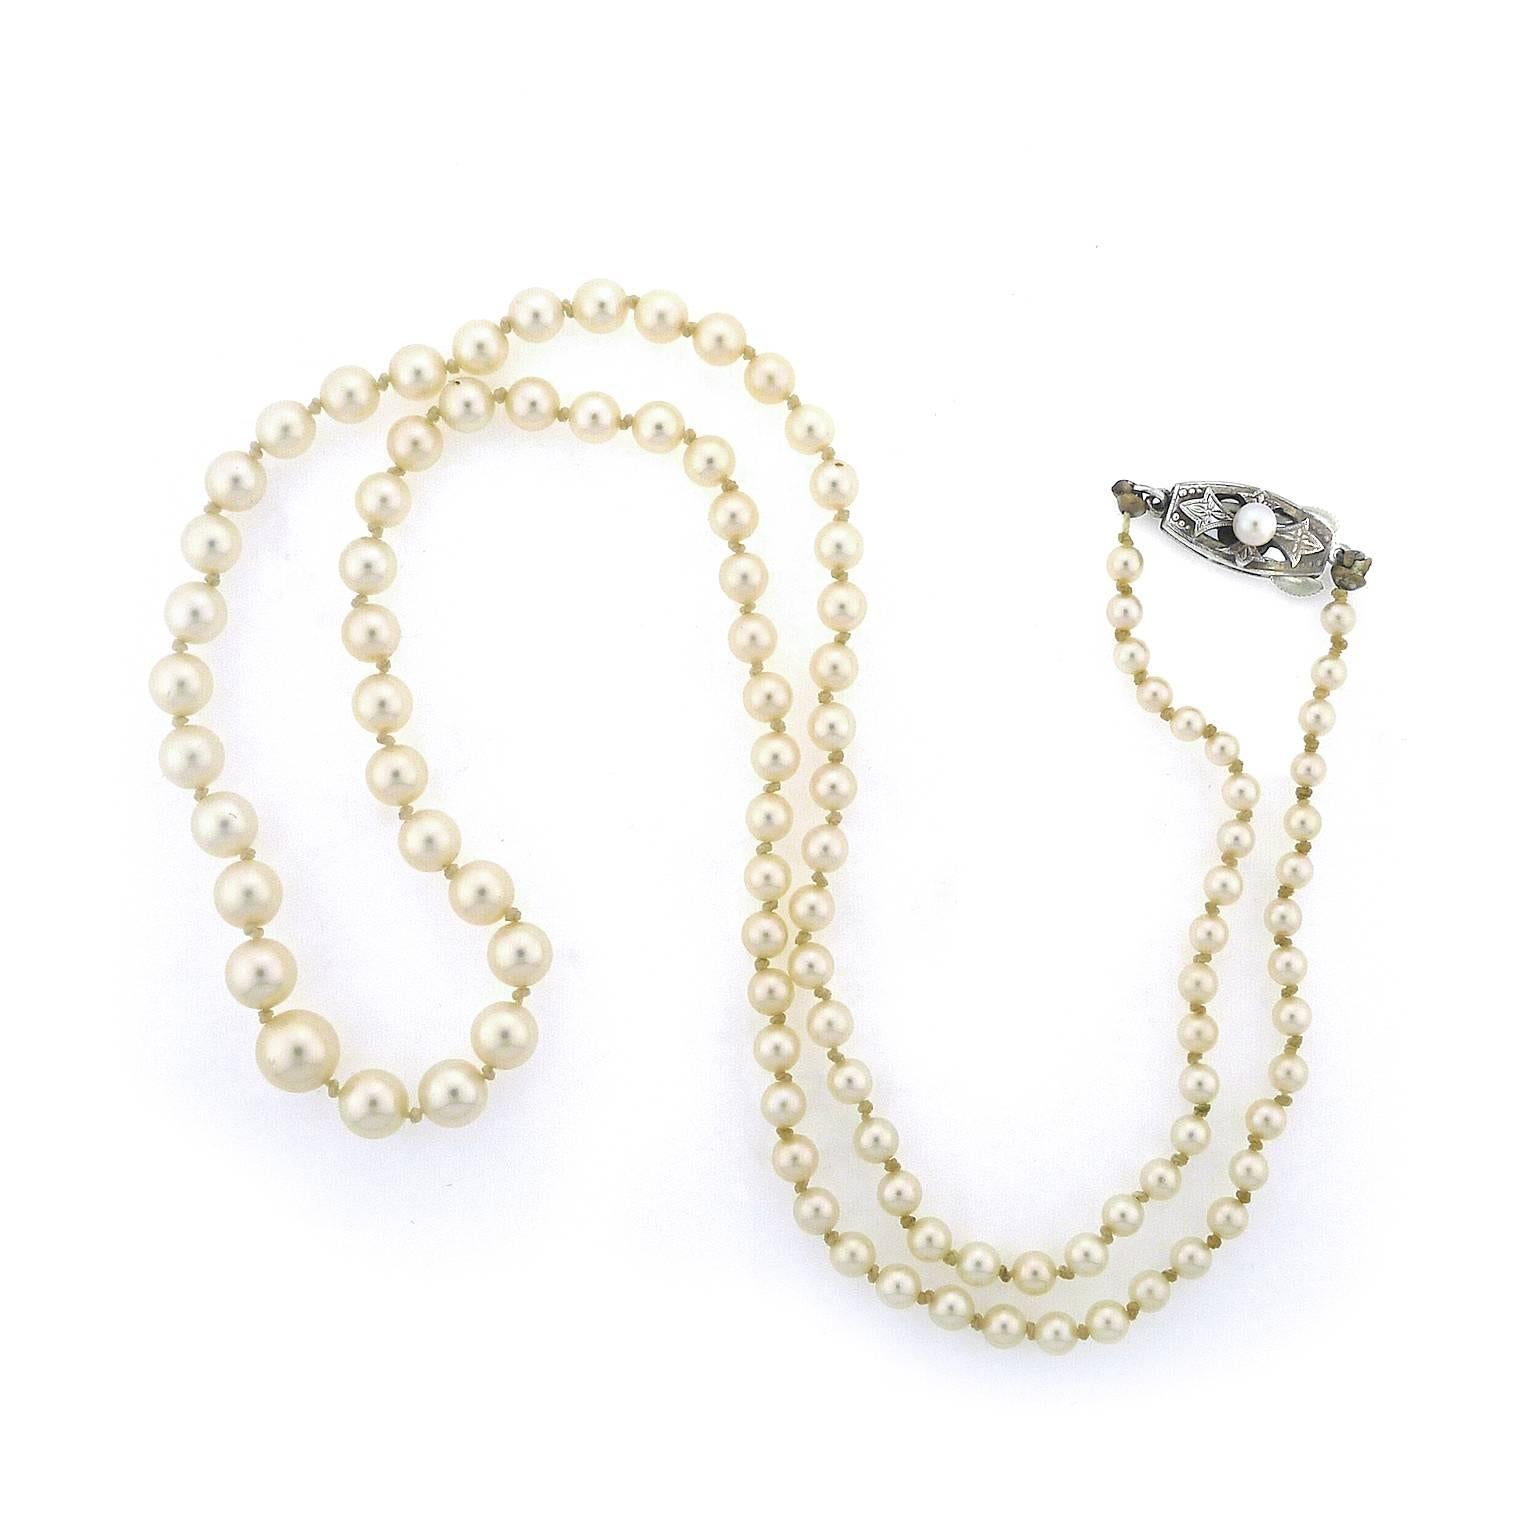 High luster, creamy white cultured pearls circa 1950's graduate from 3 millimeters to 7 millimeters. Silver clasp is set with one 3.66 millimeter cultured pearl. Surface of pearls is free from blemishes. Necklace measures 22 inches including clasp